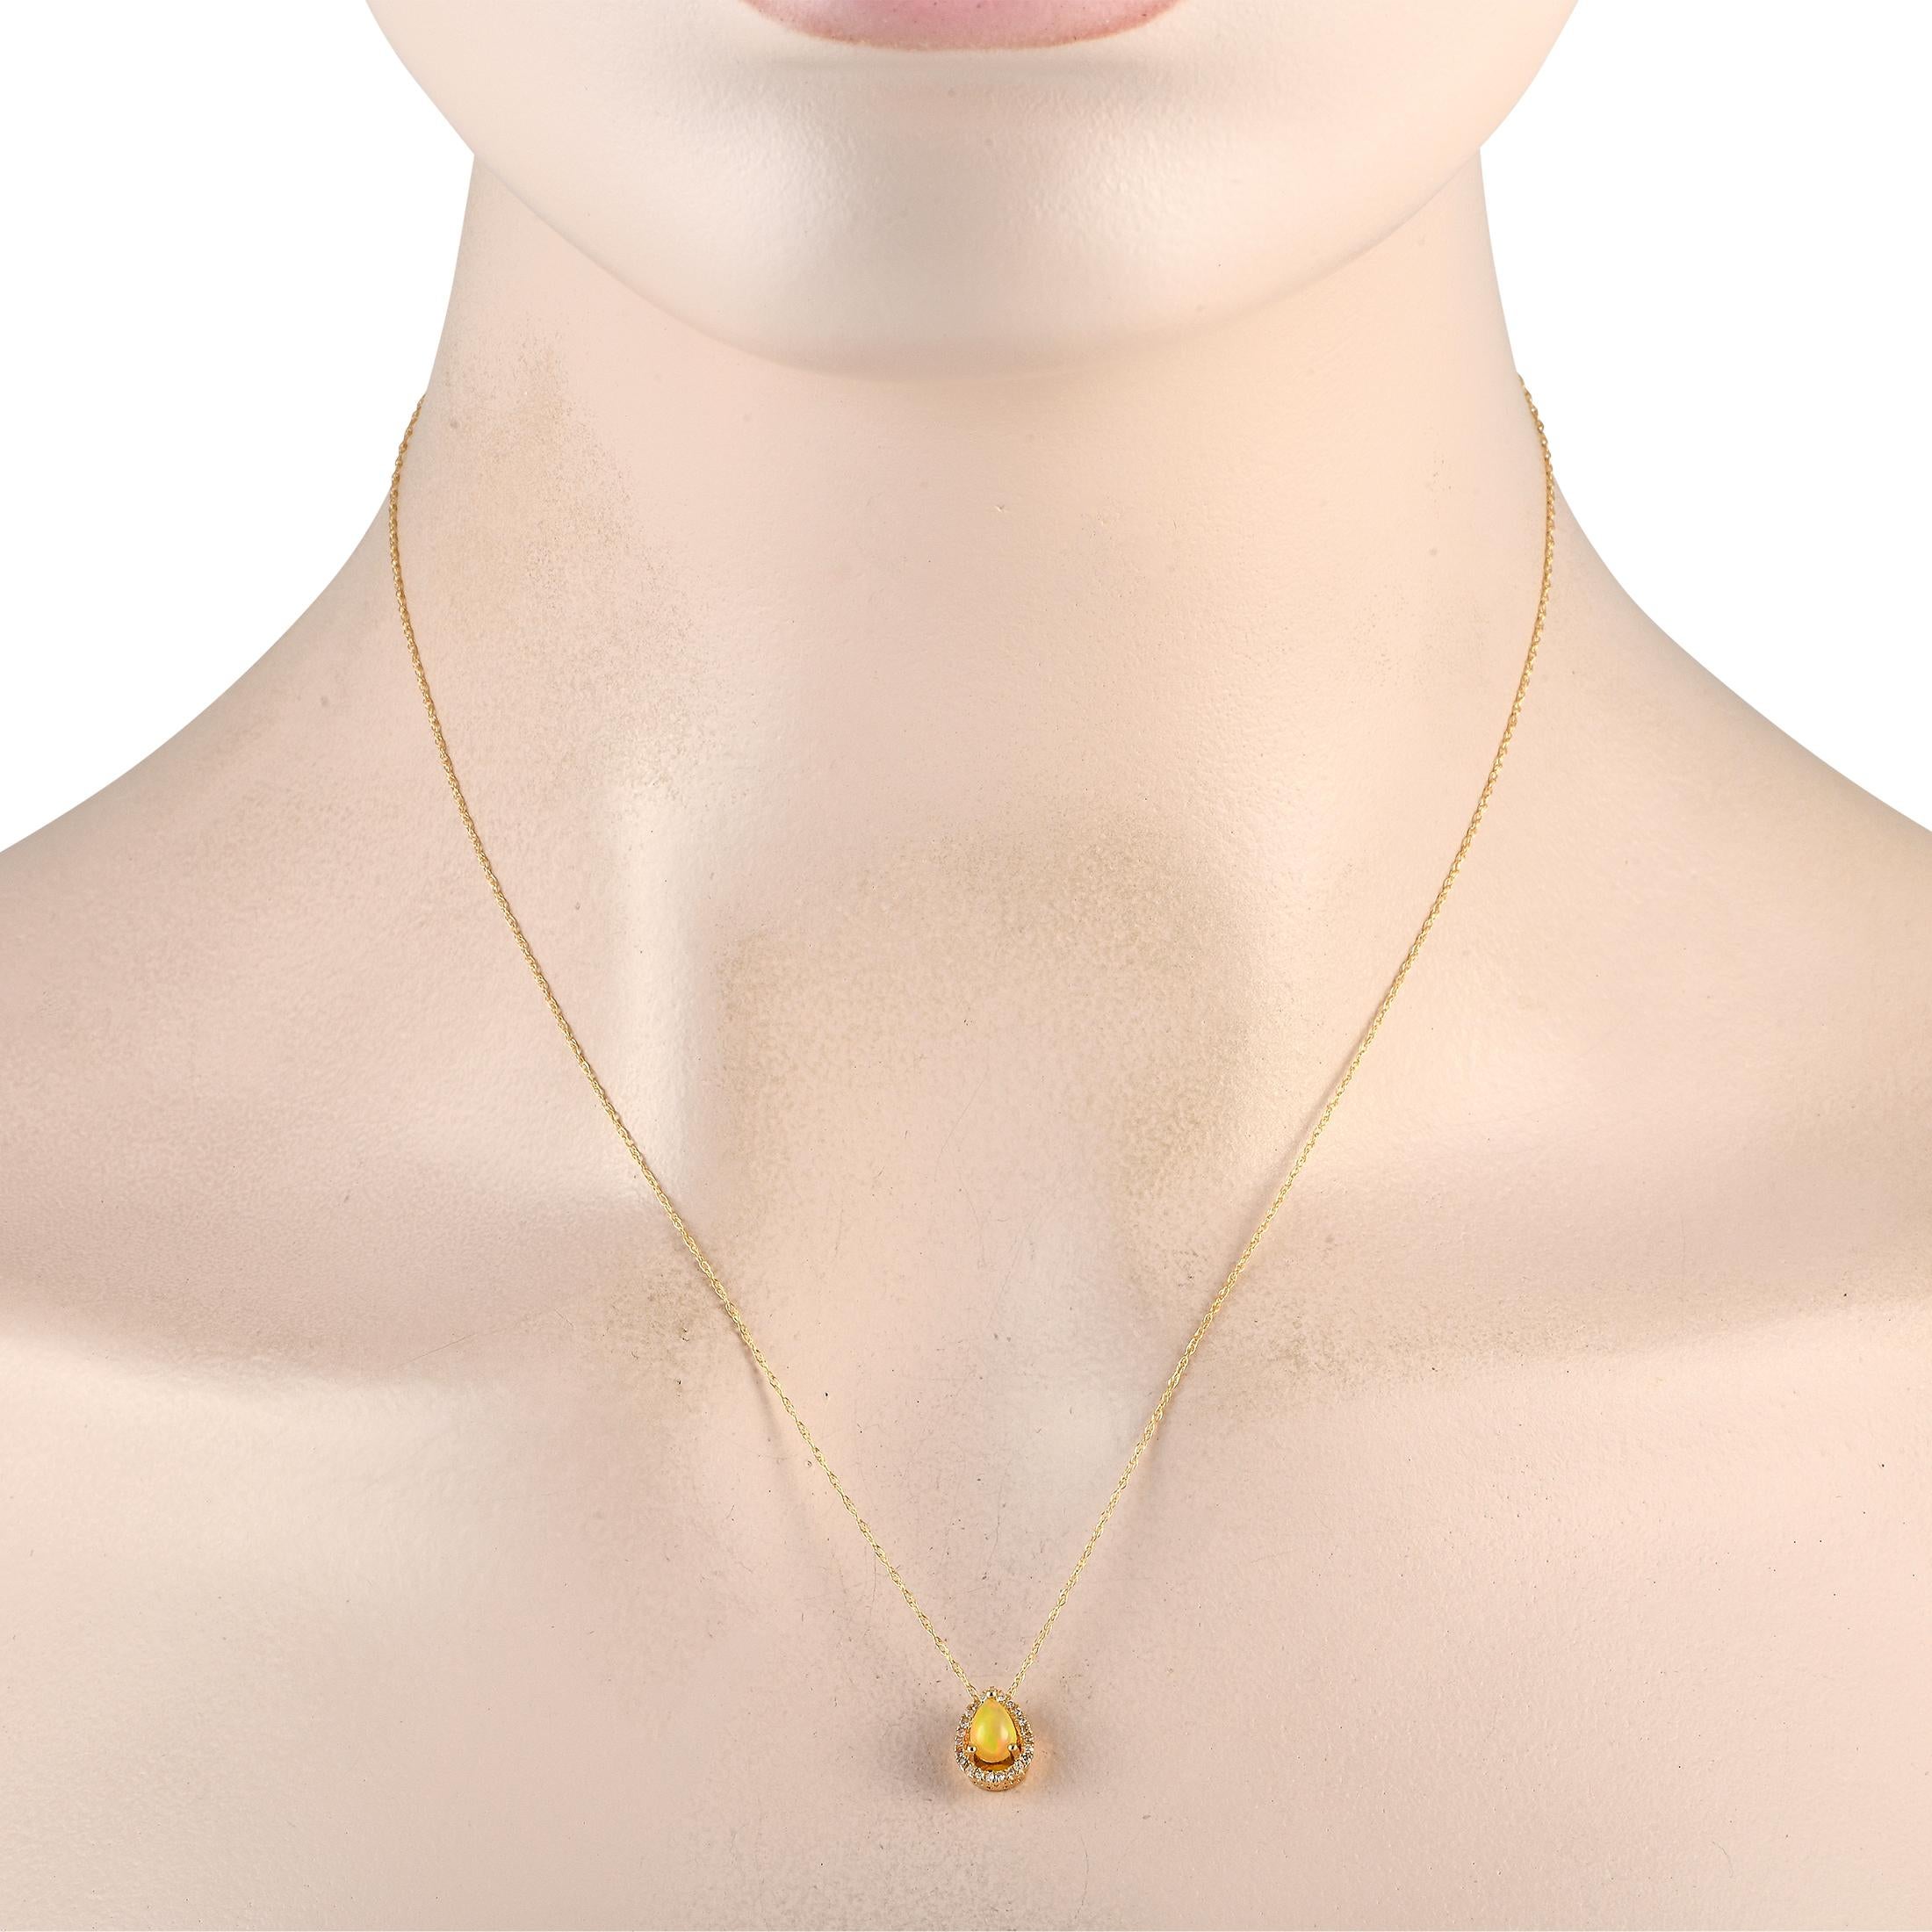 A captivating yellow Opal gemstone serves as a stunning focal point on this impeccably crafted necklace. This luxurious piece features a 14K Yellow Gold pendant measuring 0.45 long by 0.25 wide. Its suspended from an 18 chain and is also adorned